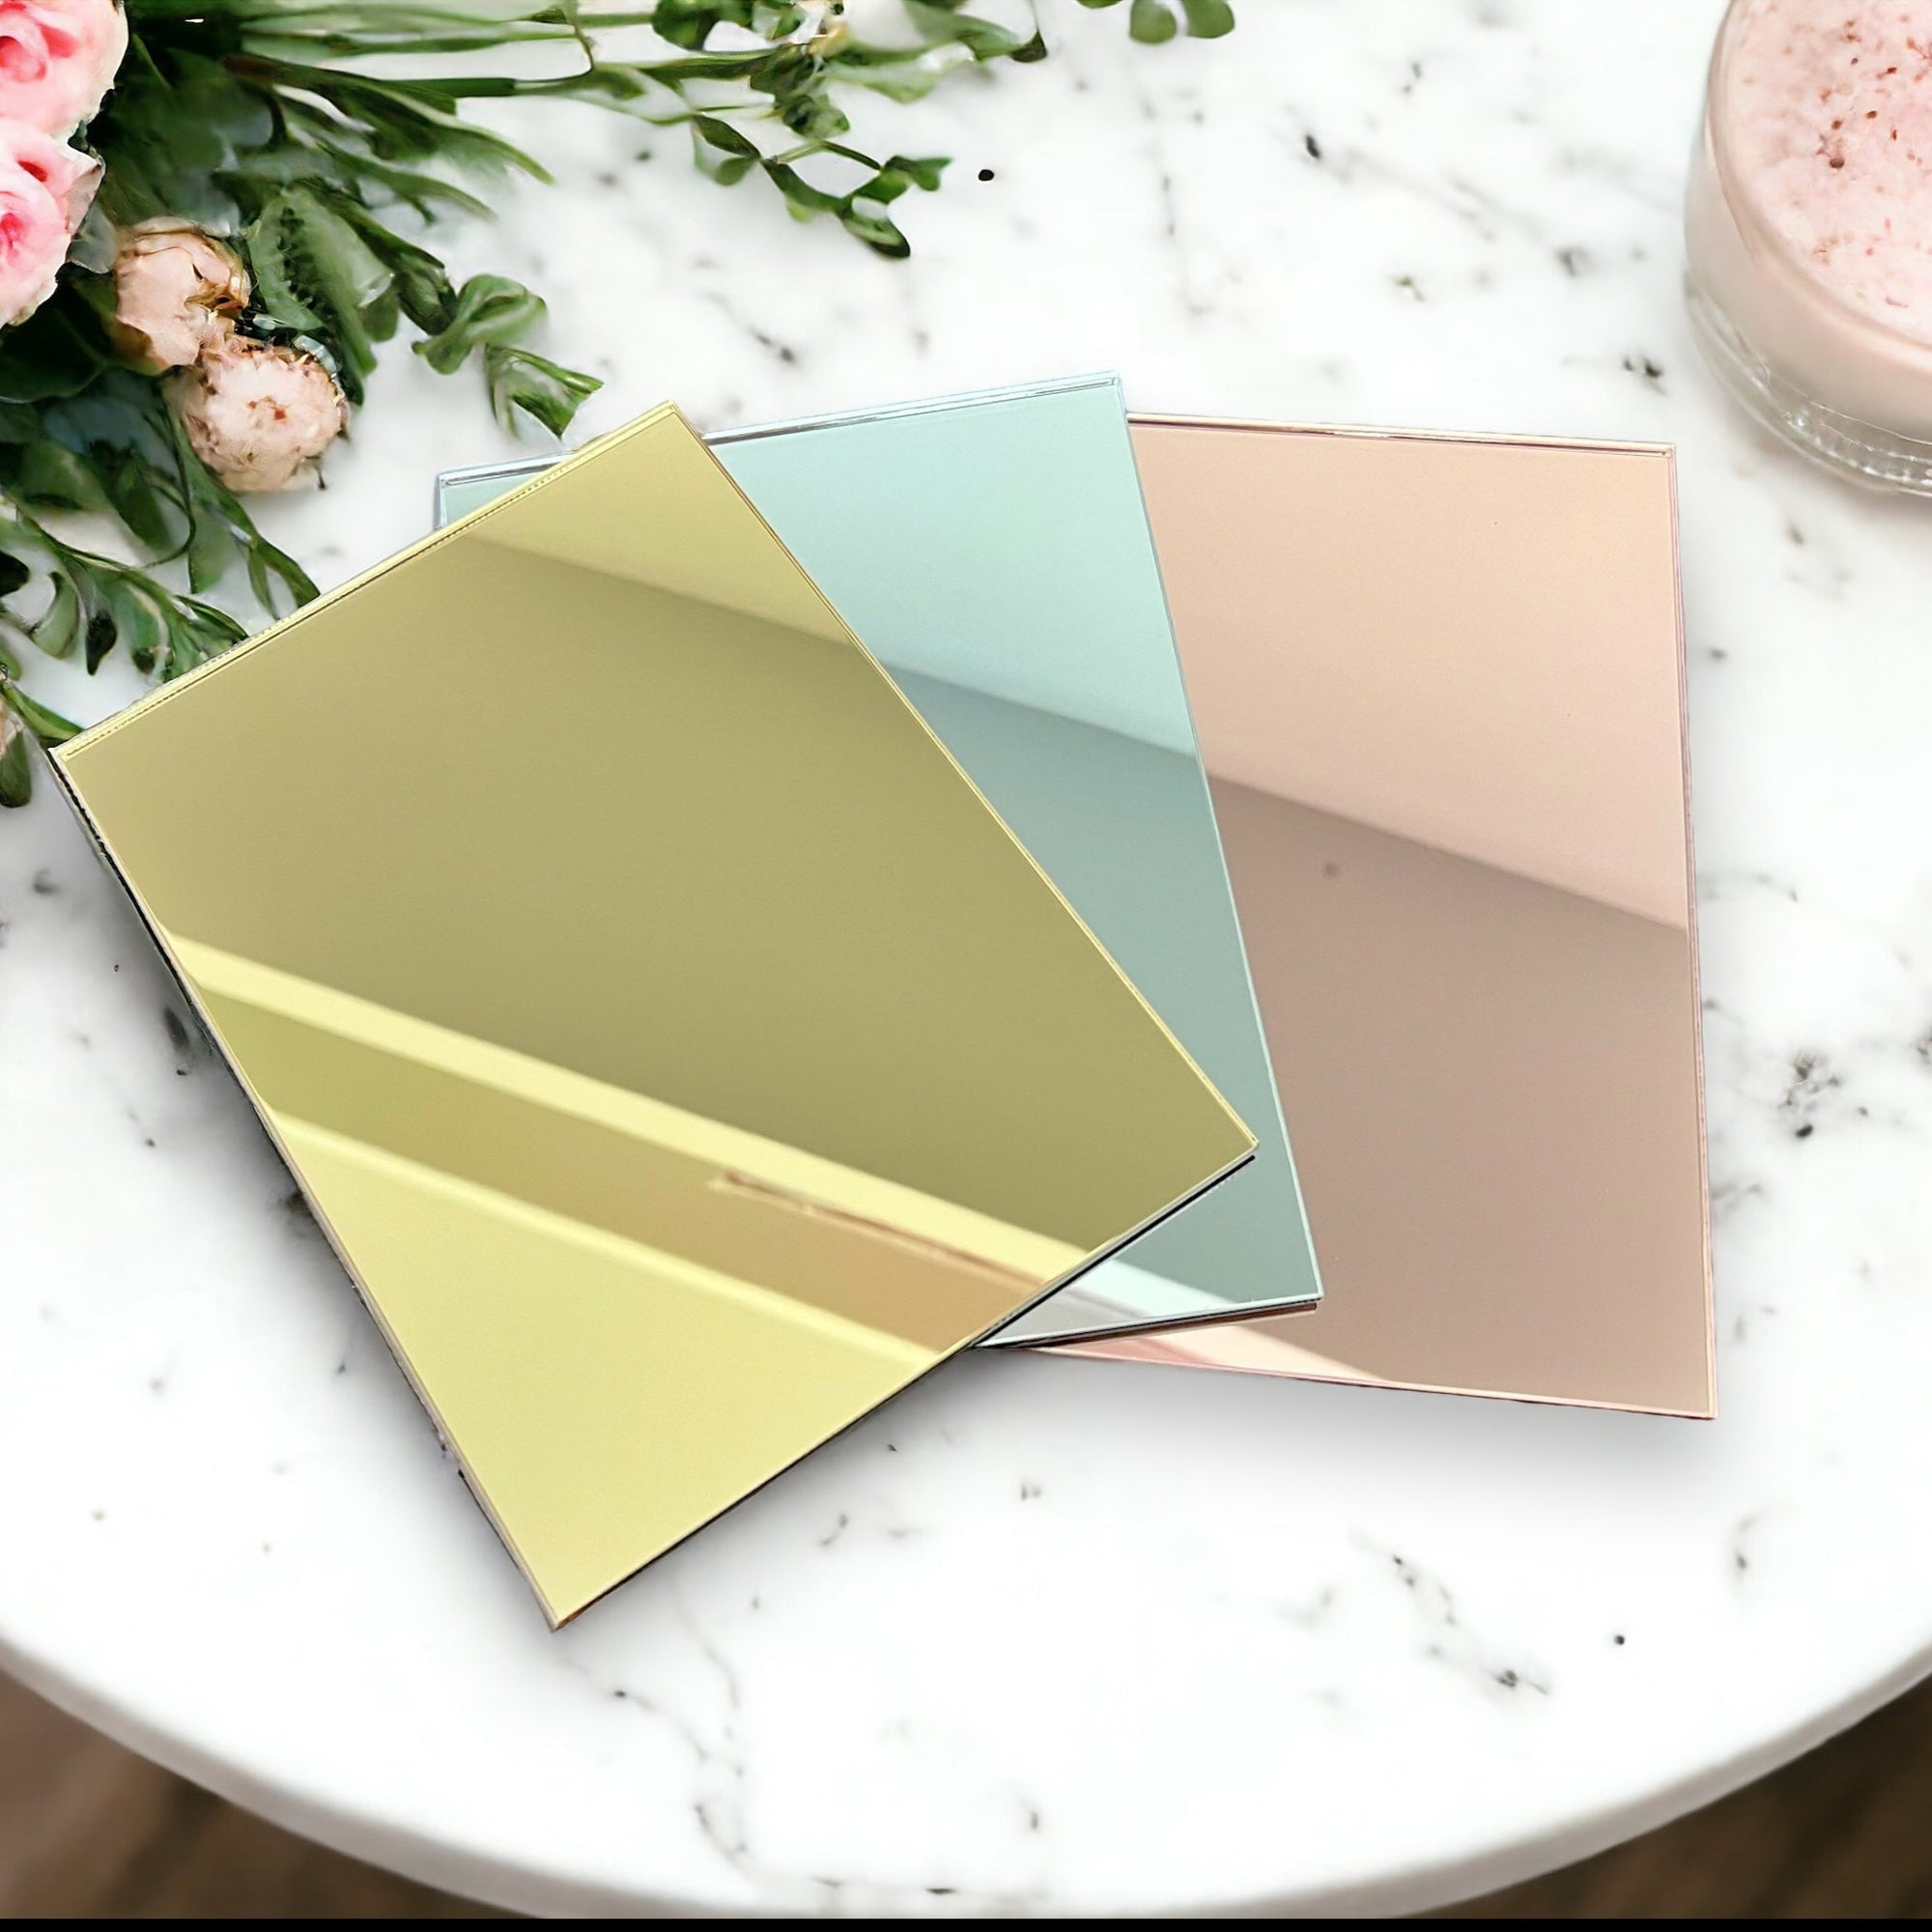 Gold, Silver or Rose Gold Mirror Acrylic Blank Stock Sheet Lucite Wedding Signs | DIY Perspex Mirrored Foil Blanks | Wholesale Craft Supply